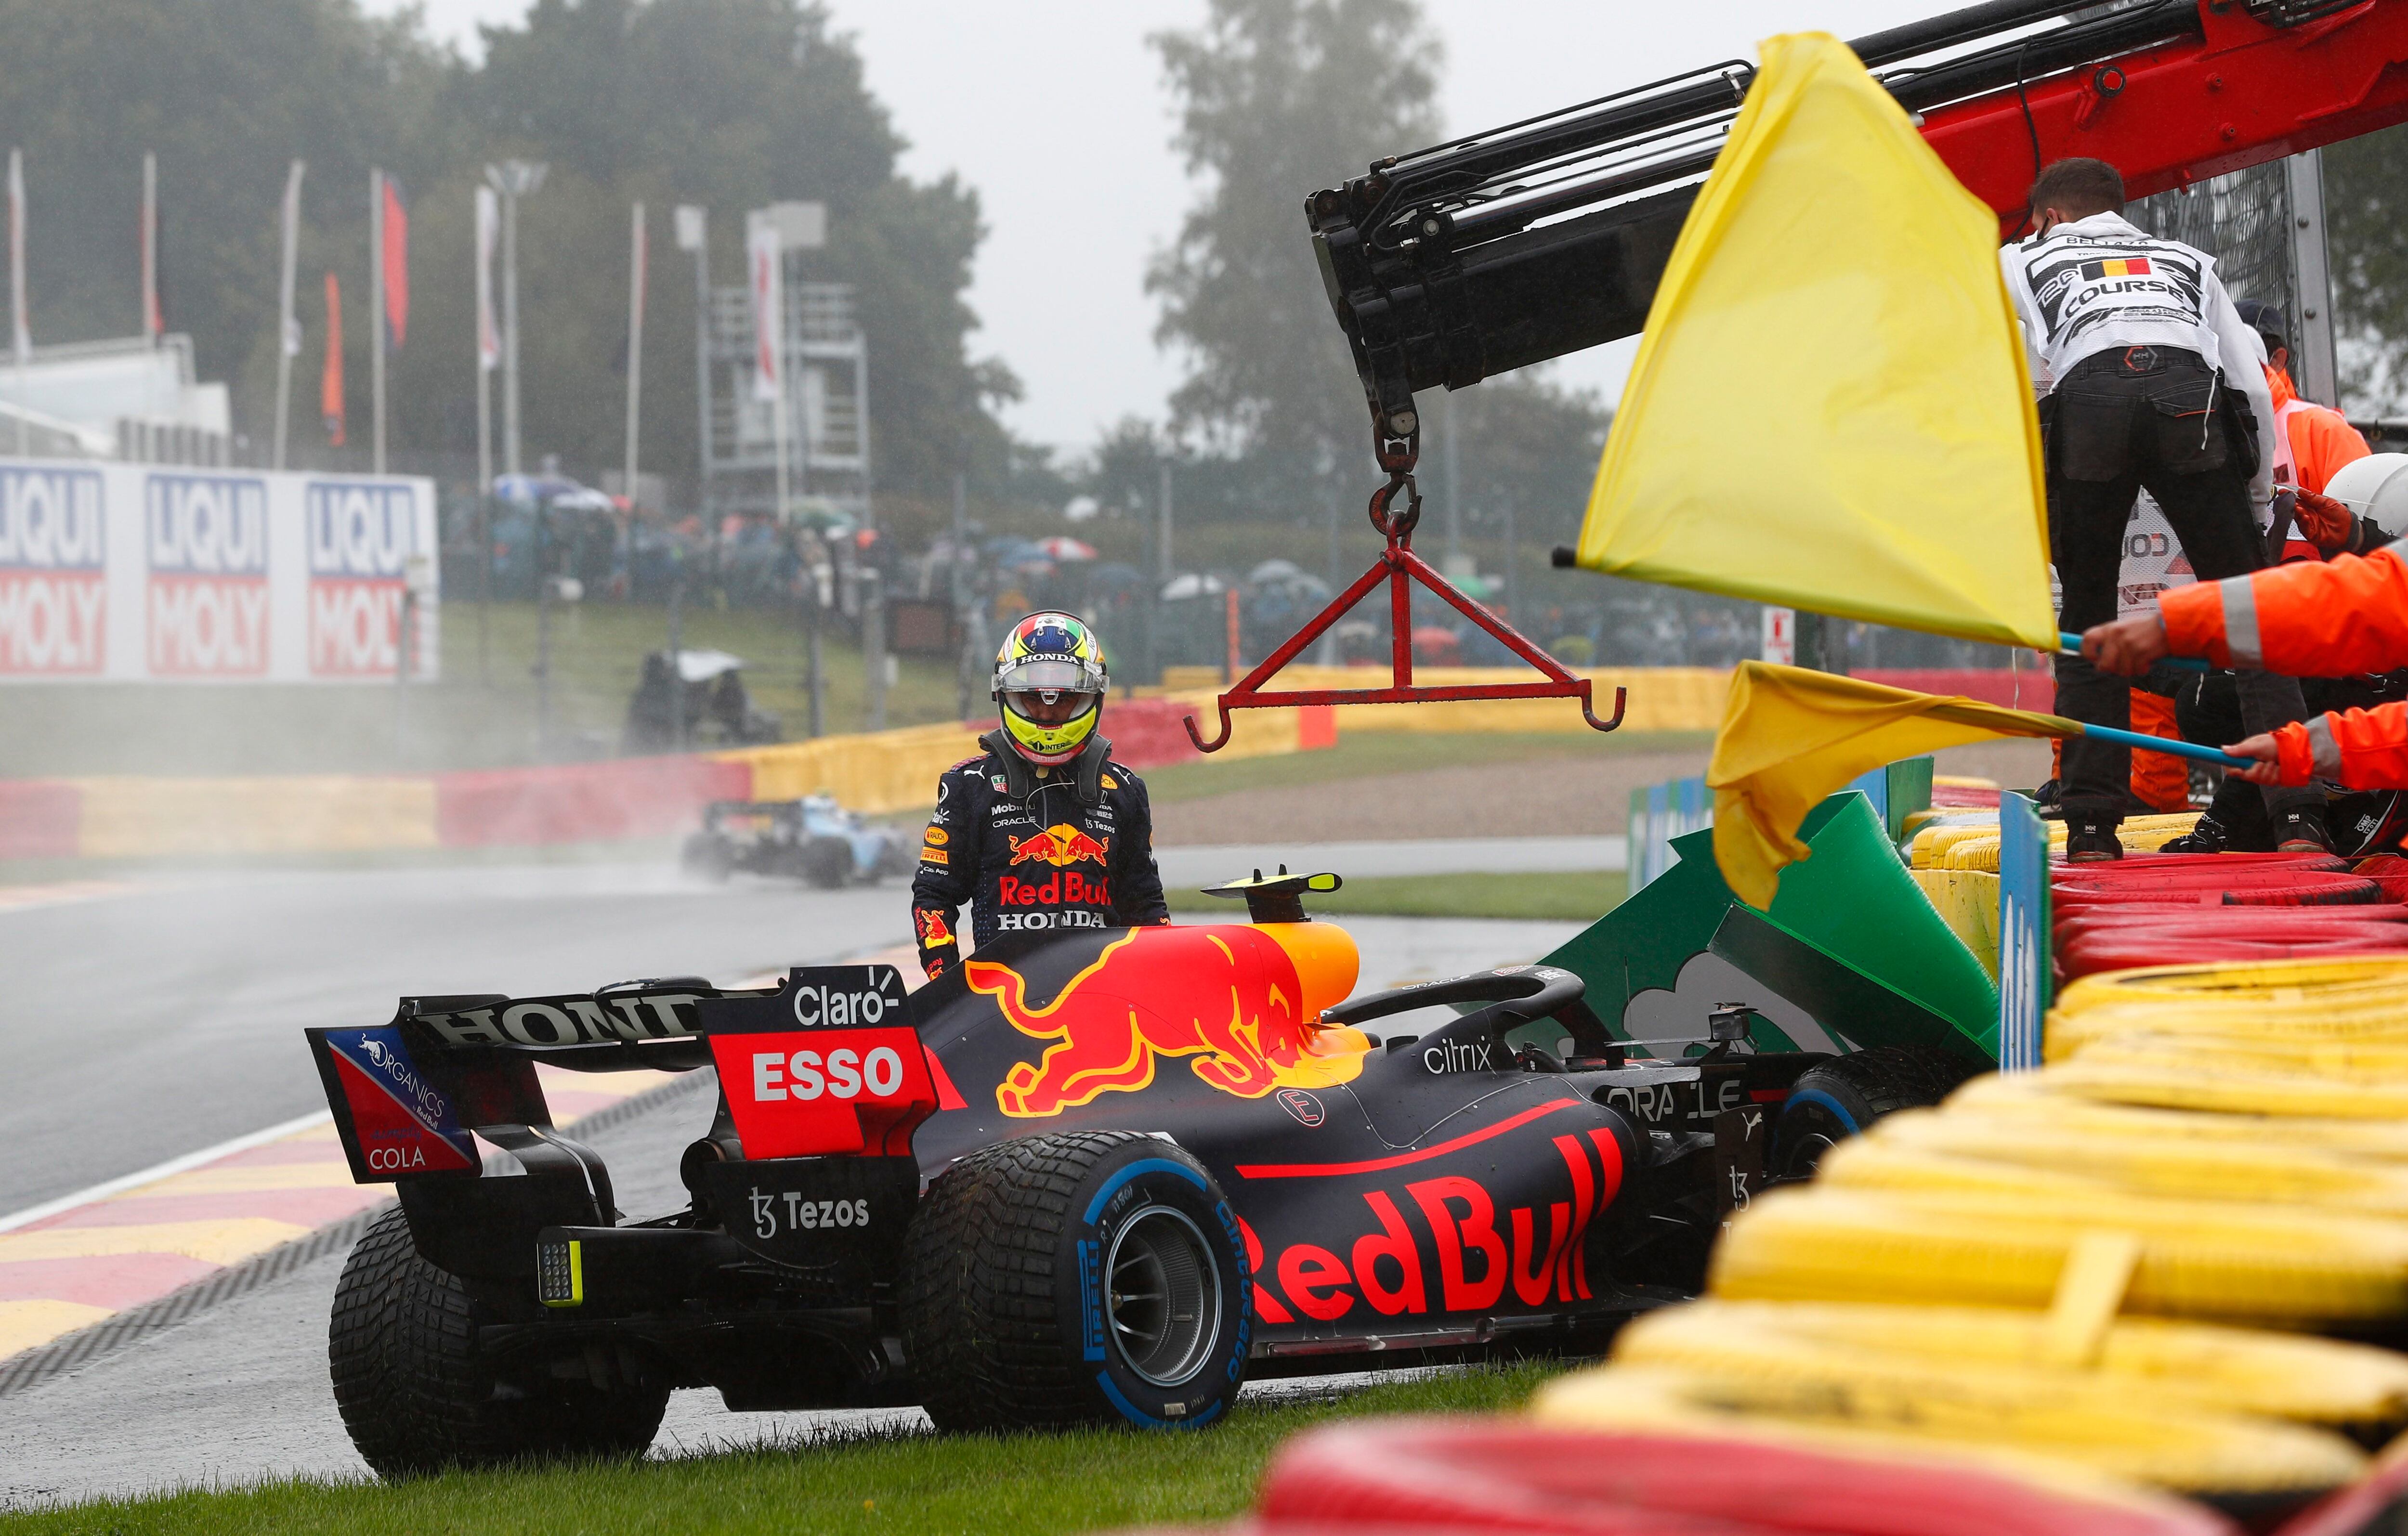 Checo's lowest moment in the 2021 season came in Belgium, where in addition to qualifying seventh after a torrential rain, he skidded implausibly on the way to the formation lap and was on the verge of abandoning the race.  (Photo: REUTERS / Johanna Geron)